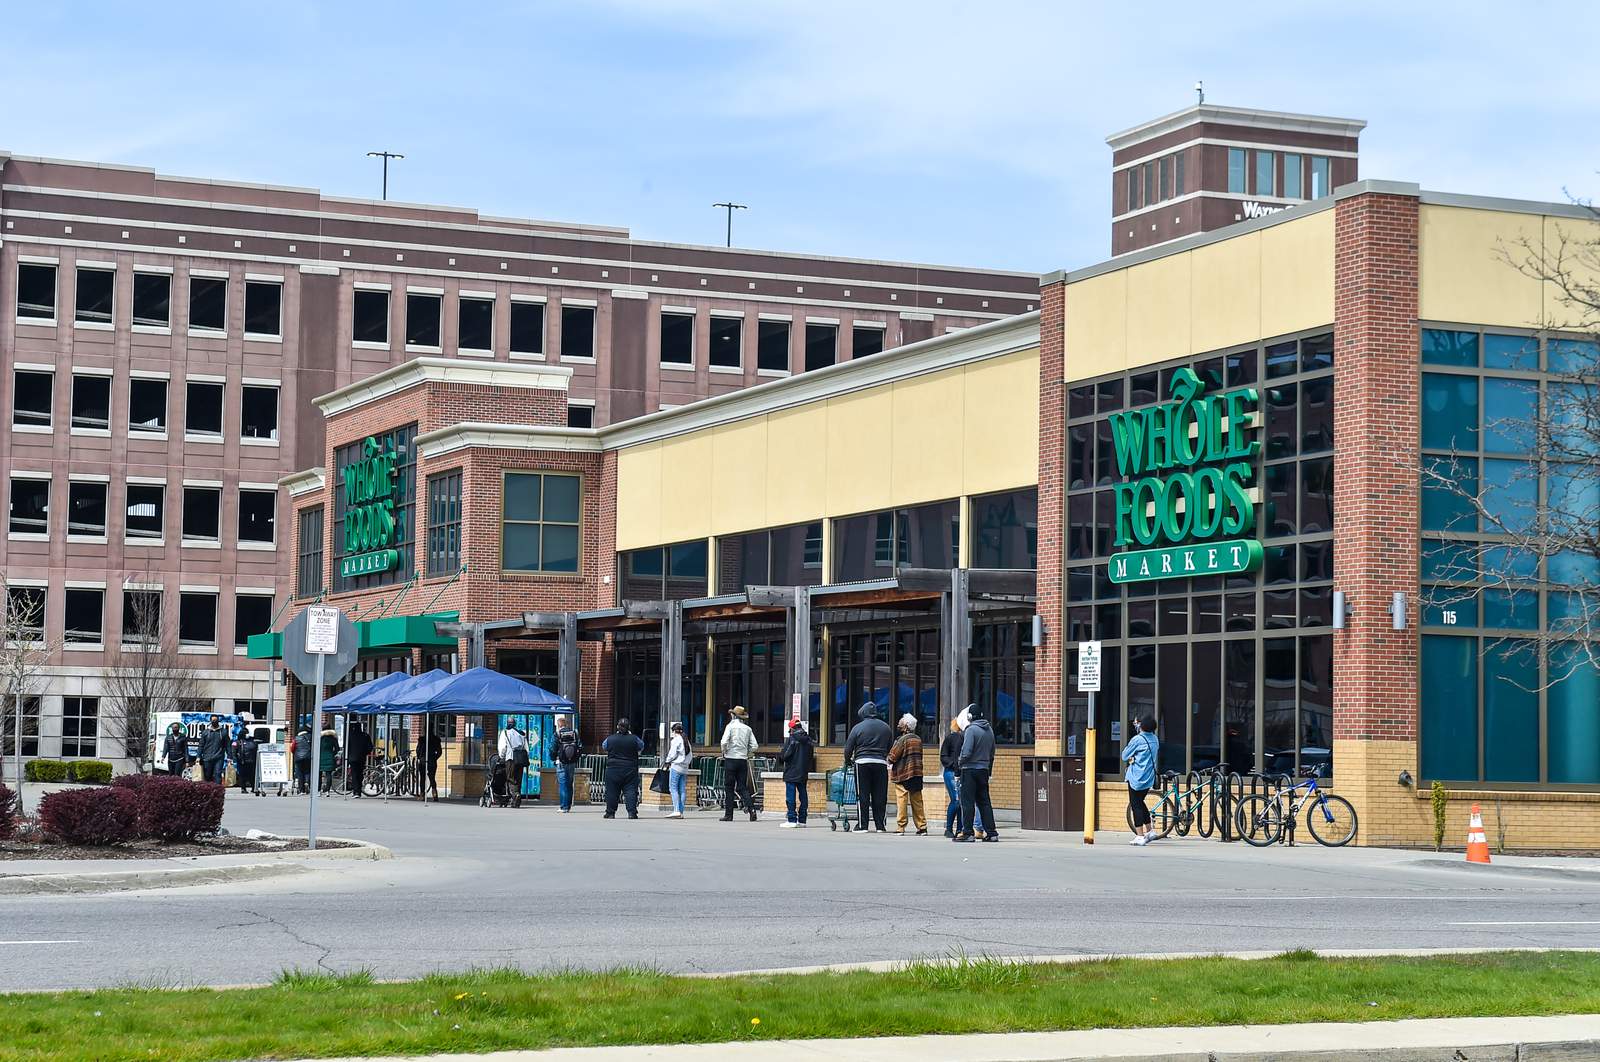 23 Detroit Whole Foods employees test positive for COVID-19, city officials say